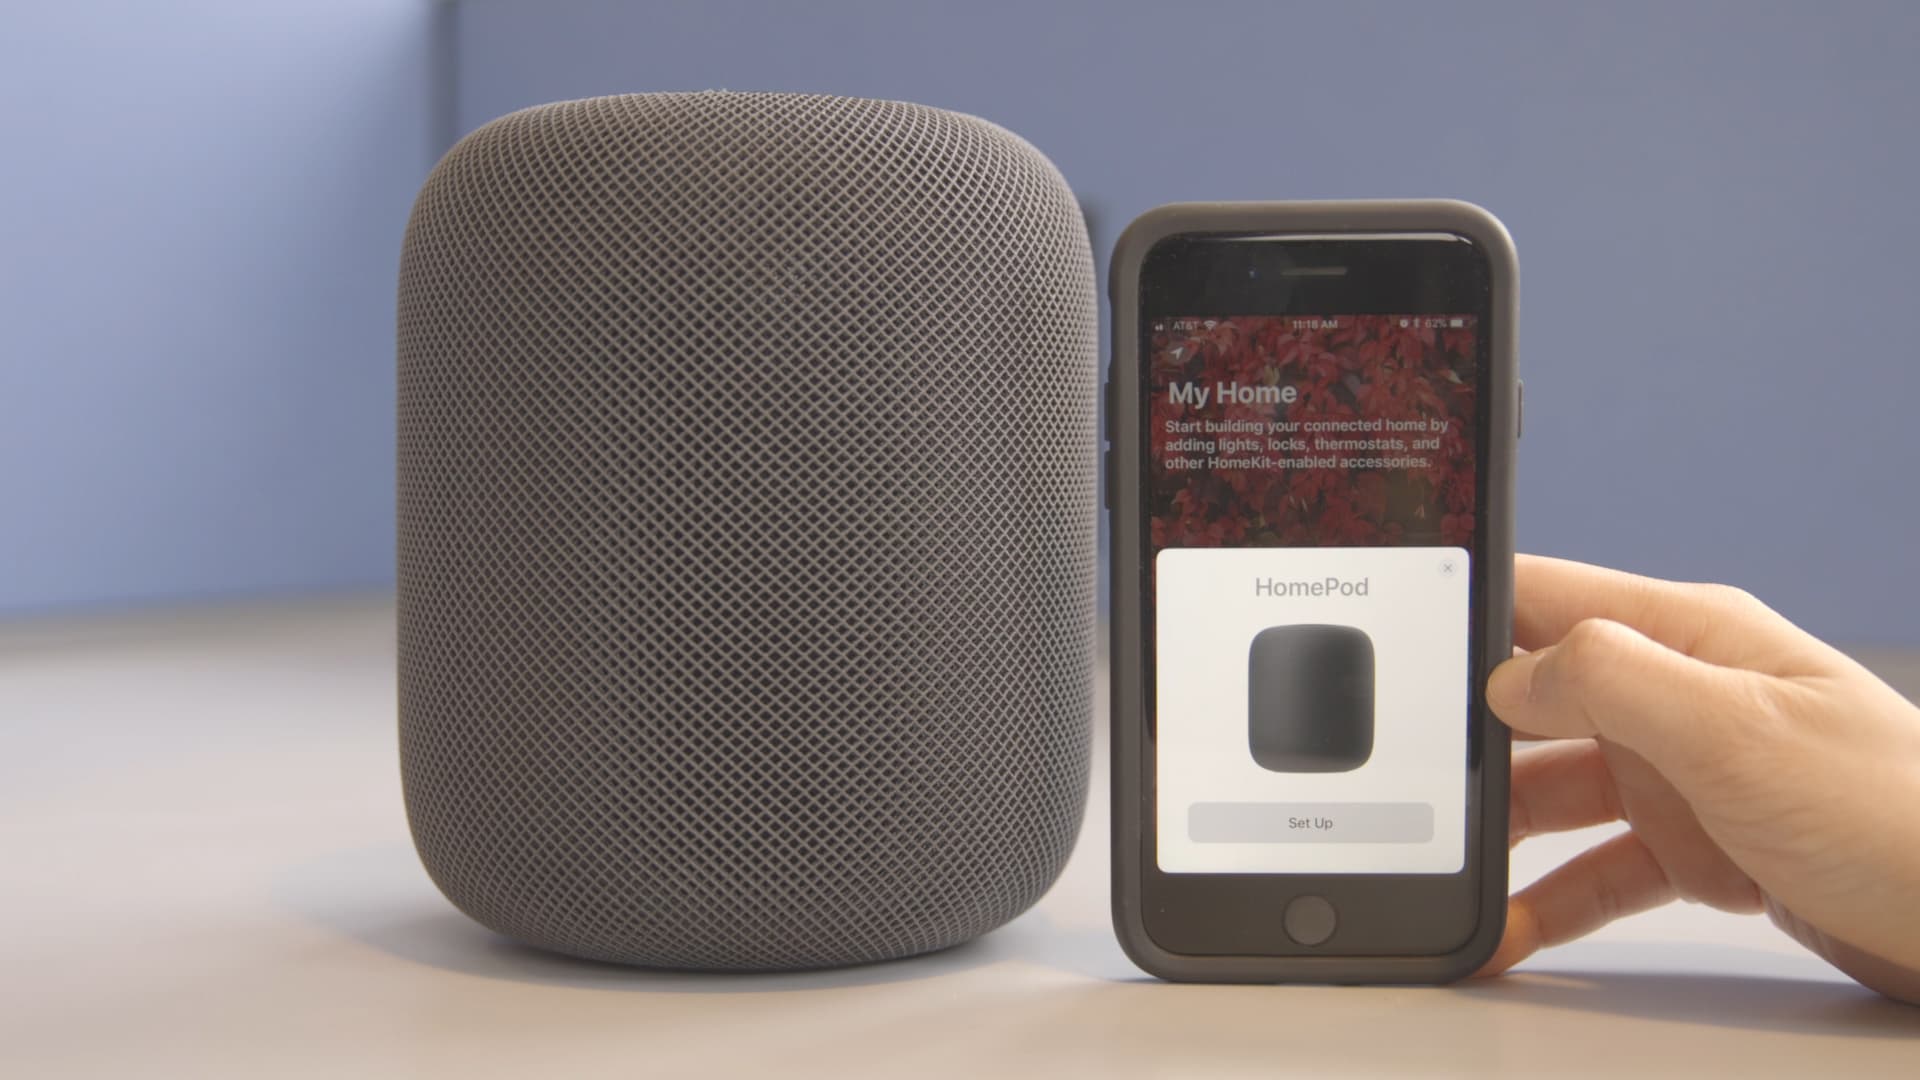 If your Apple HomePod refuses to play certain songs, here's how to fix it